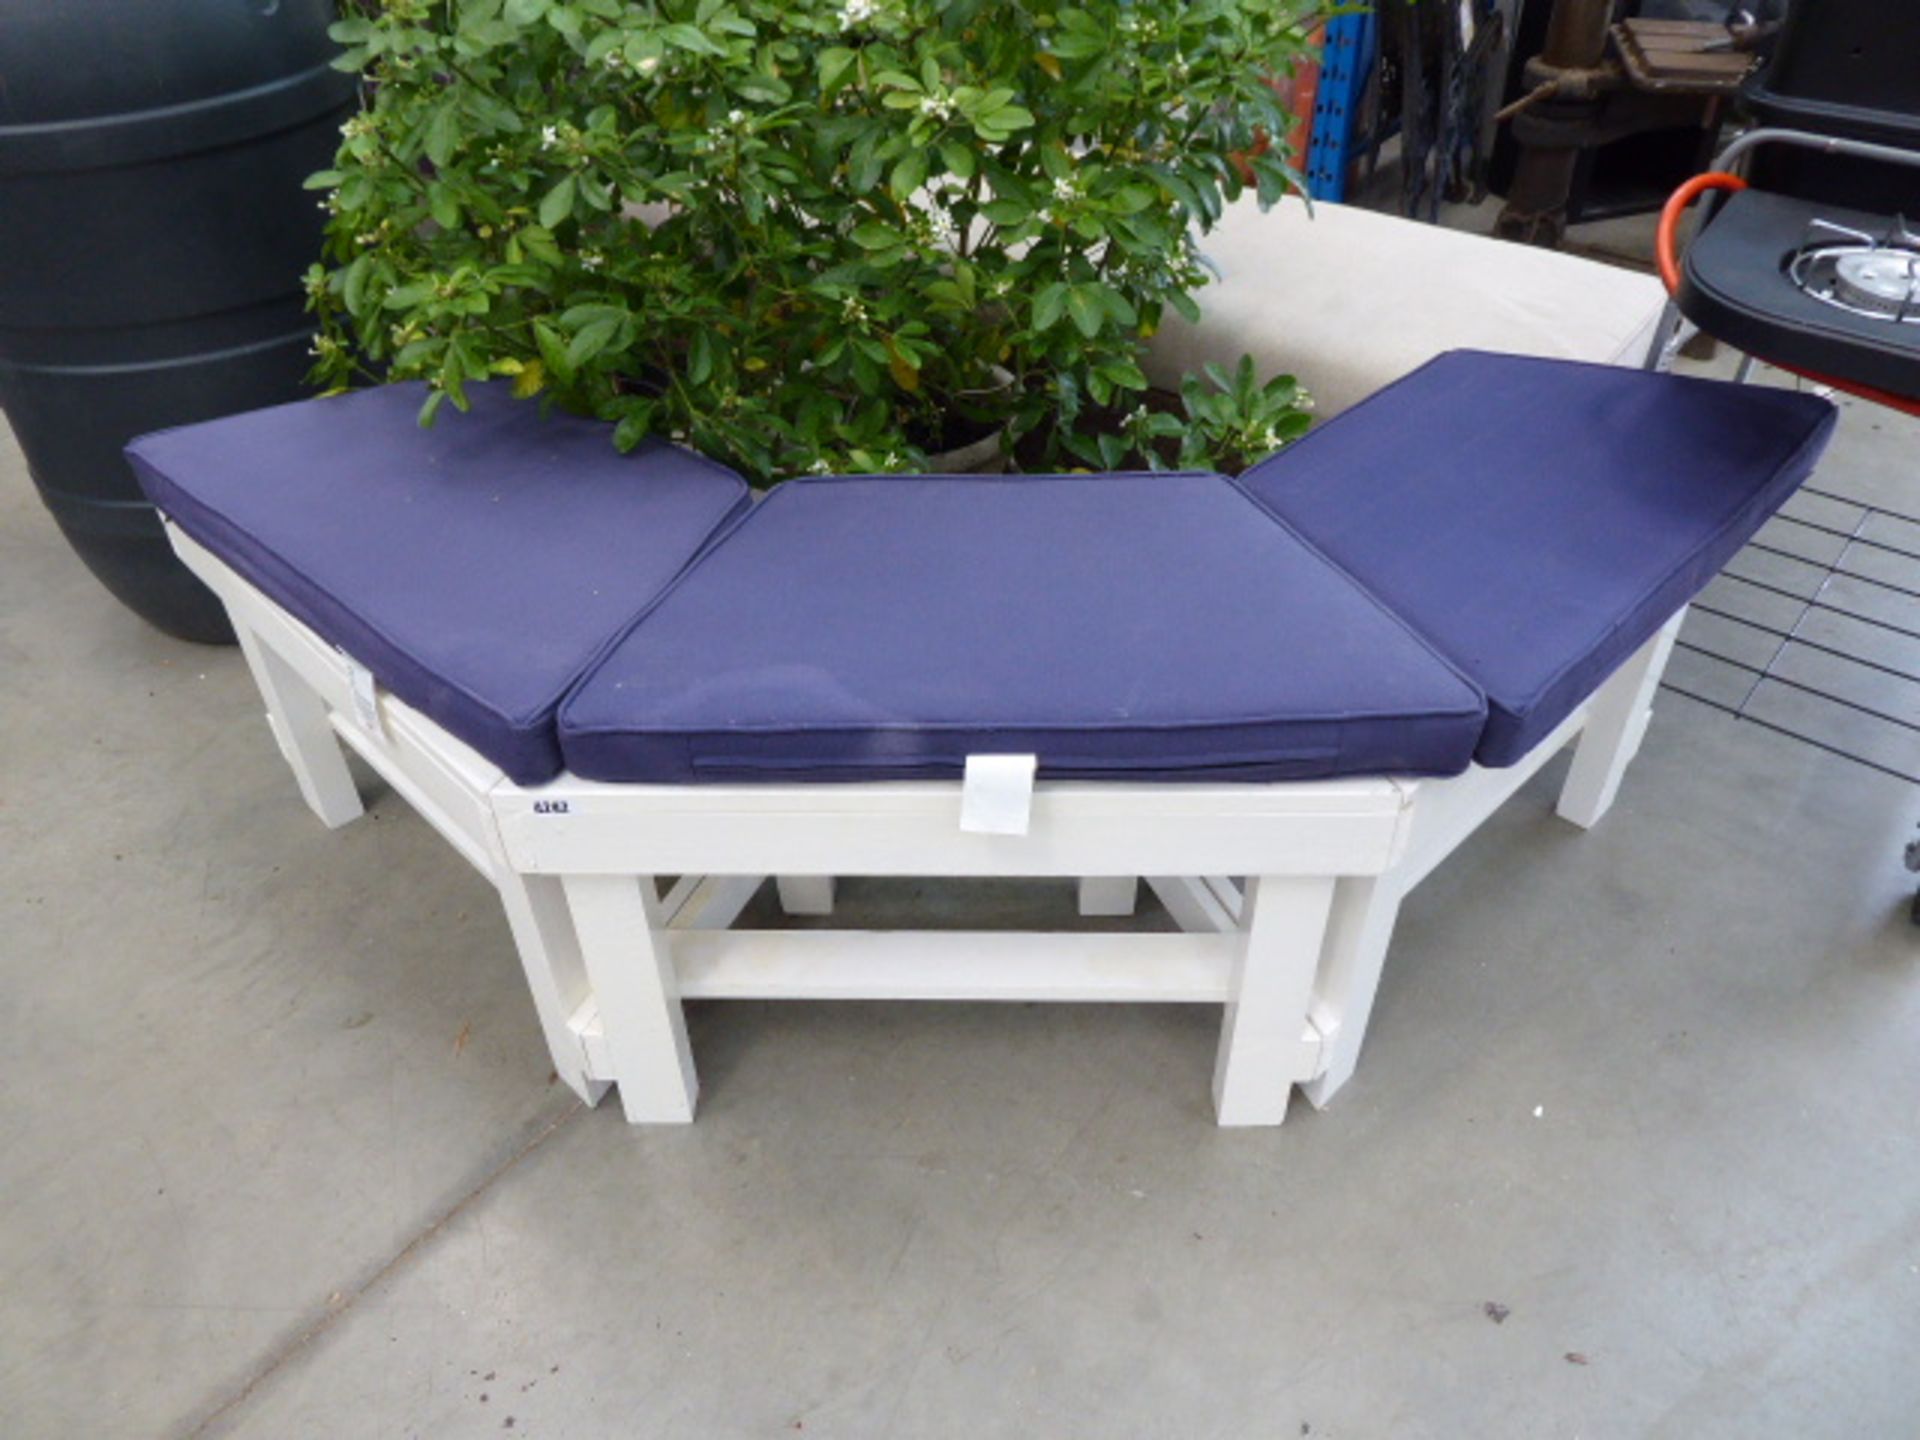 3-section white wooden seat with cushions